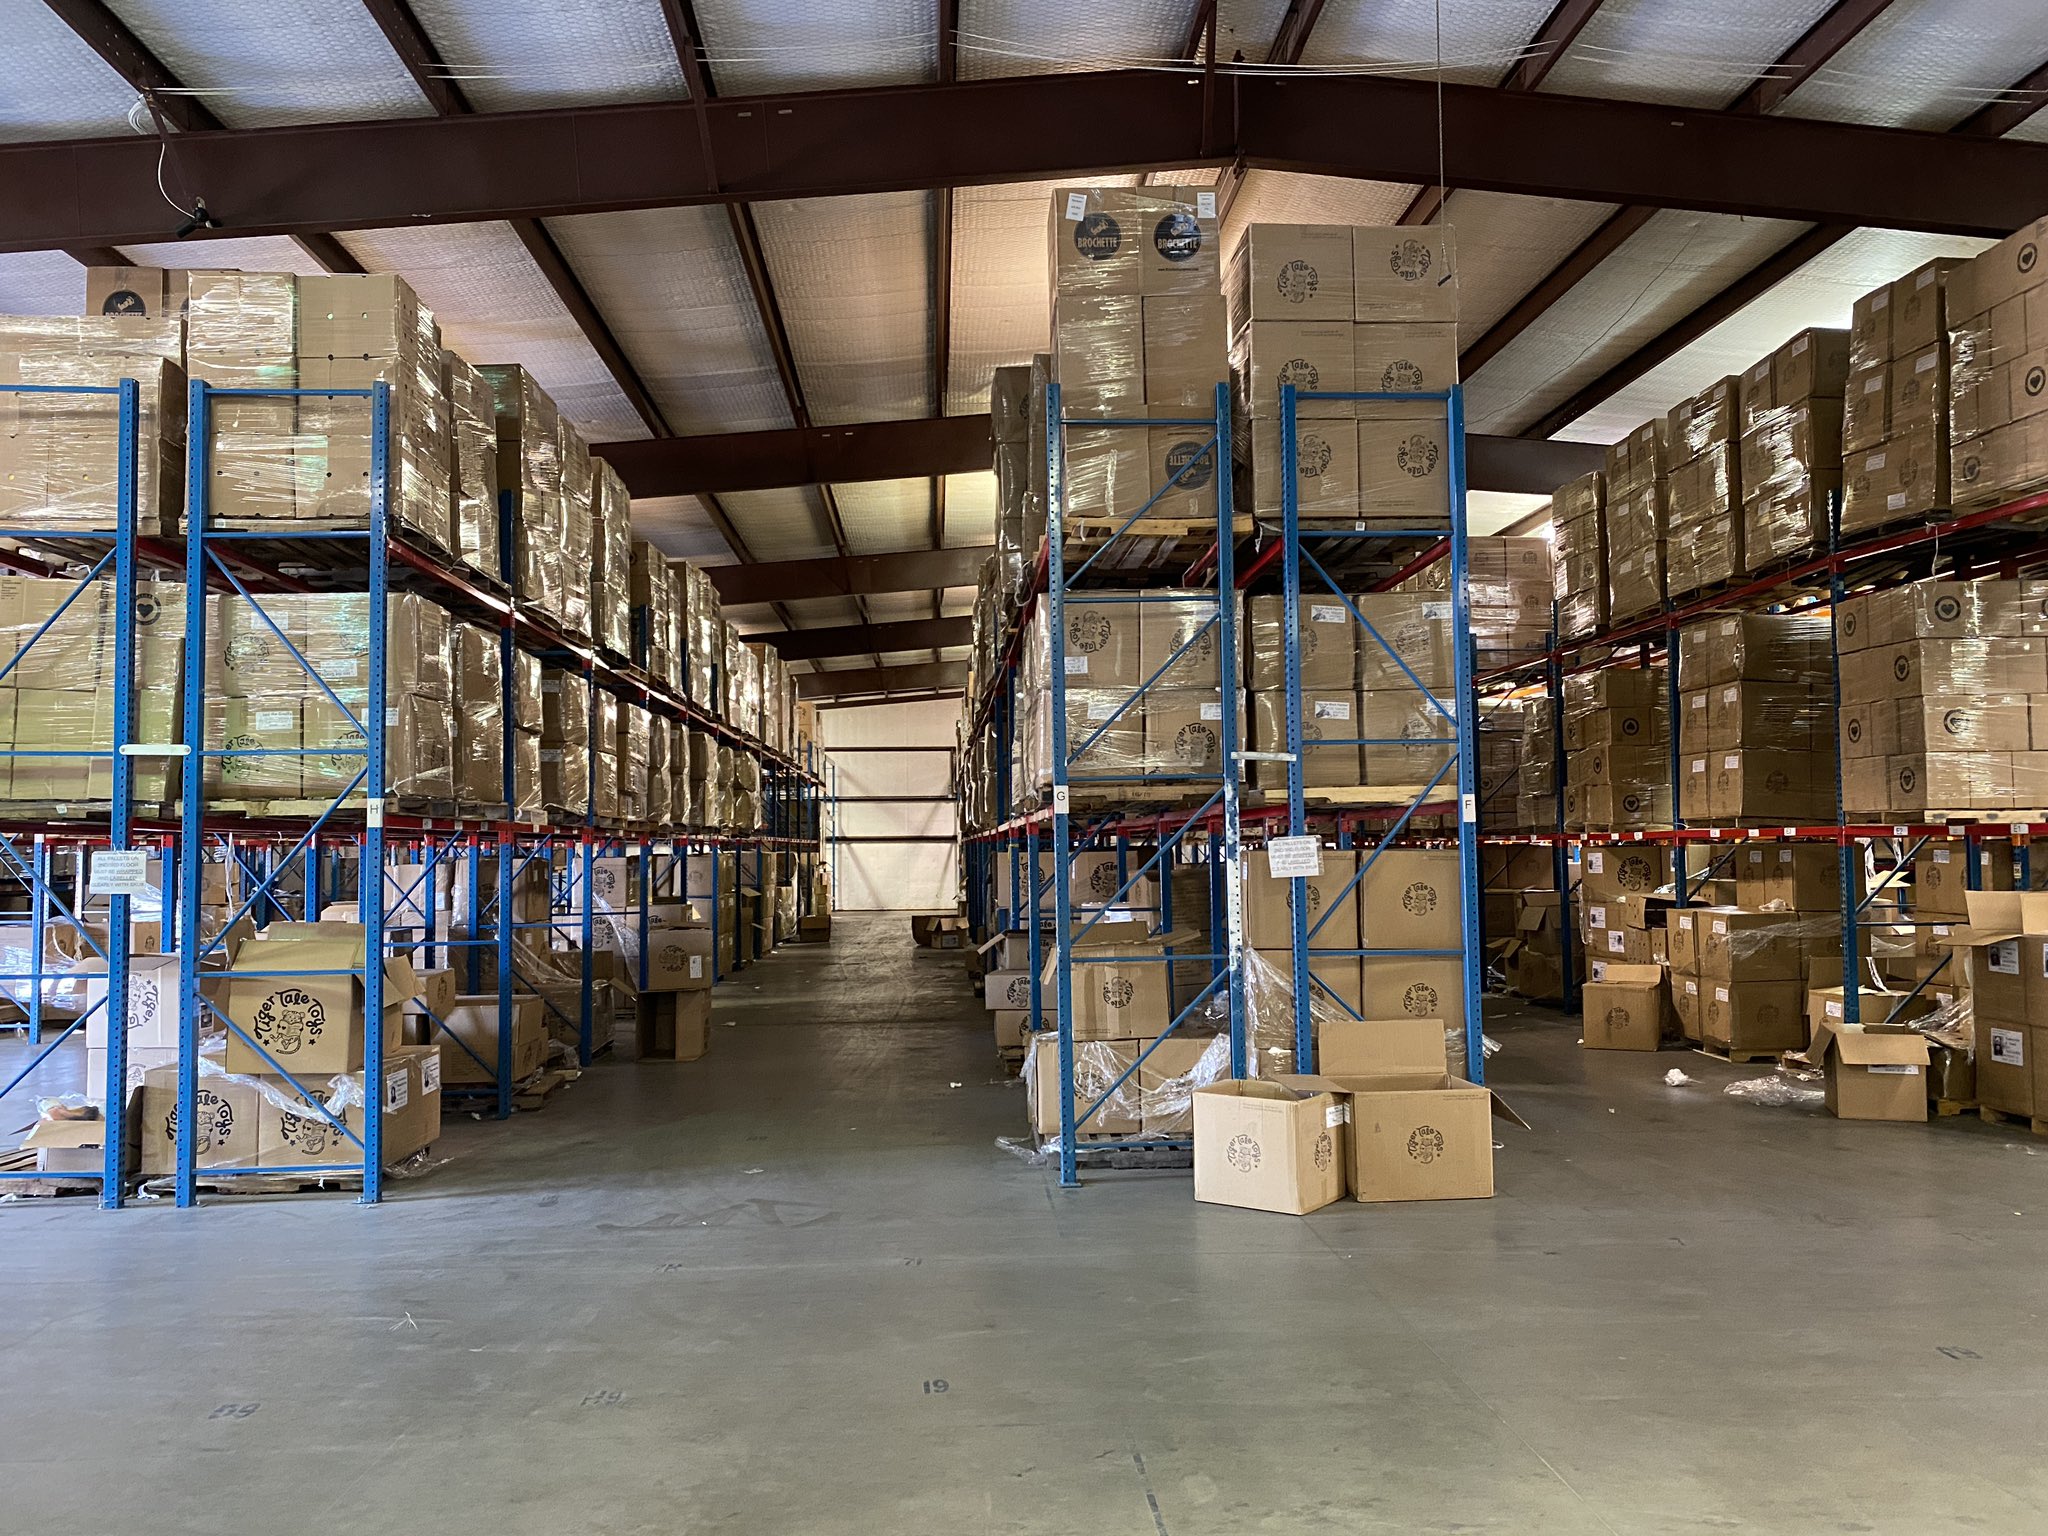 Viahart's warehouse has many years supply of some toys and games because of the shopping slowdown. (Courtesy of Mike Molson Hart)